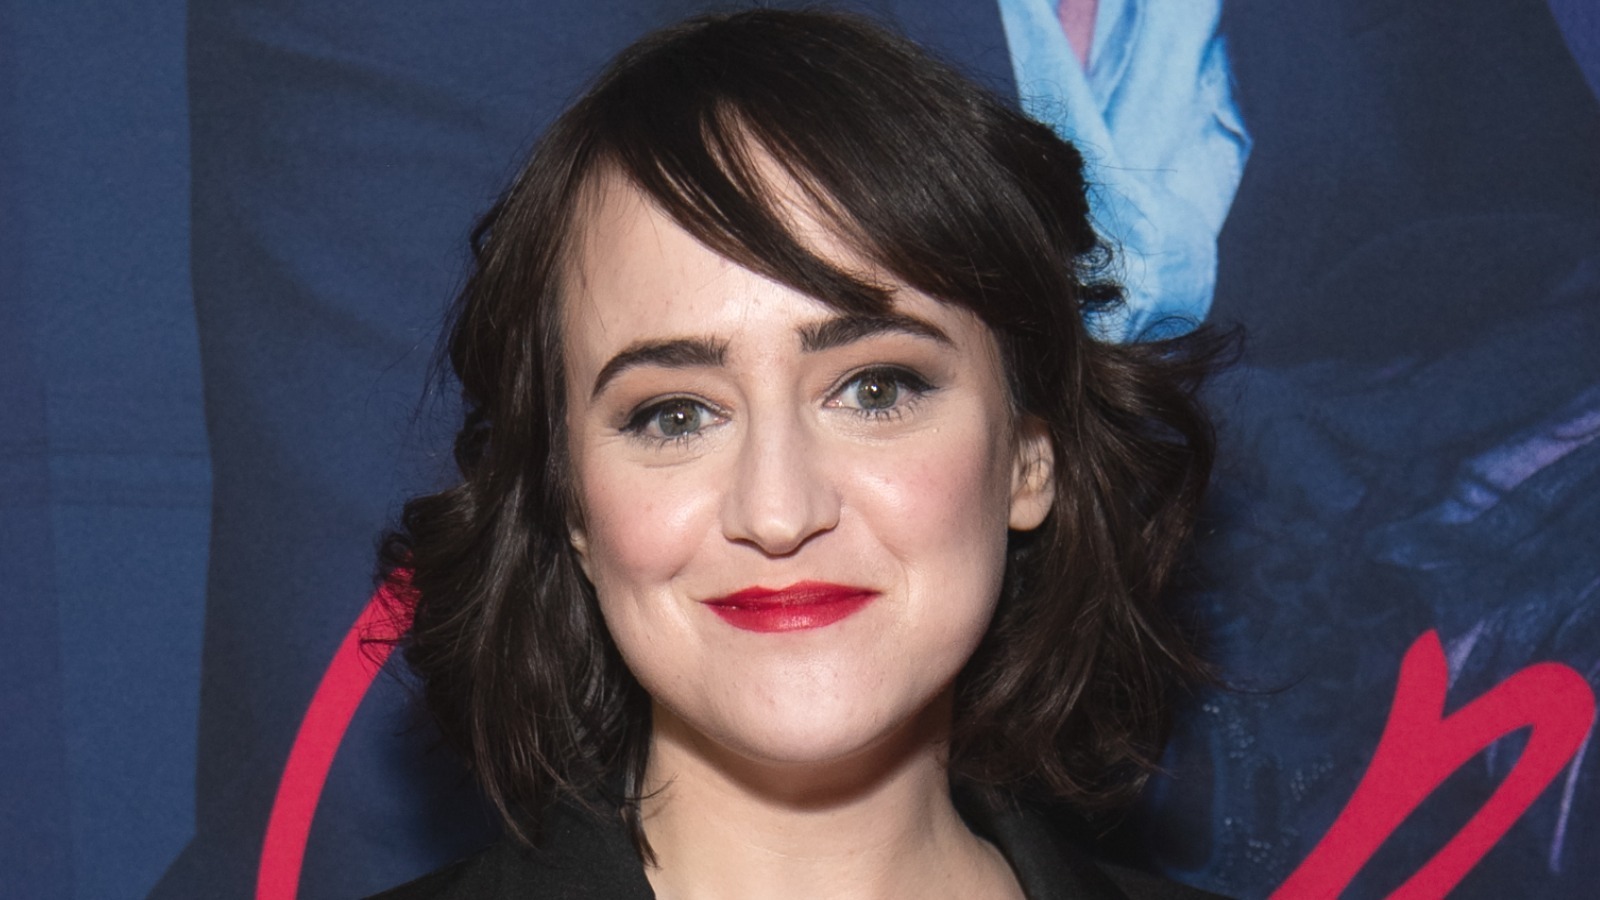 Matilda, Mara Wilson Were Sexualized As A Child: "You can't be a baby star without suffering trauma"